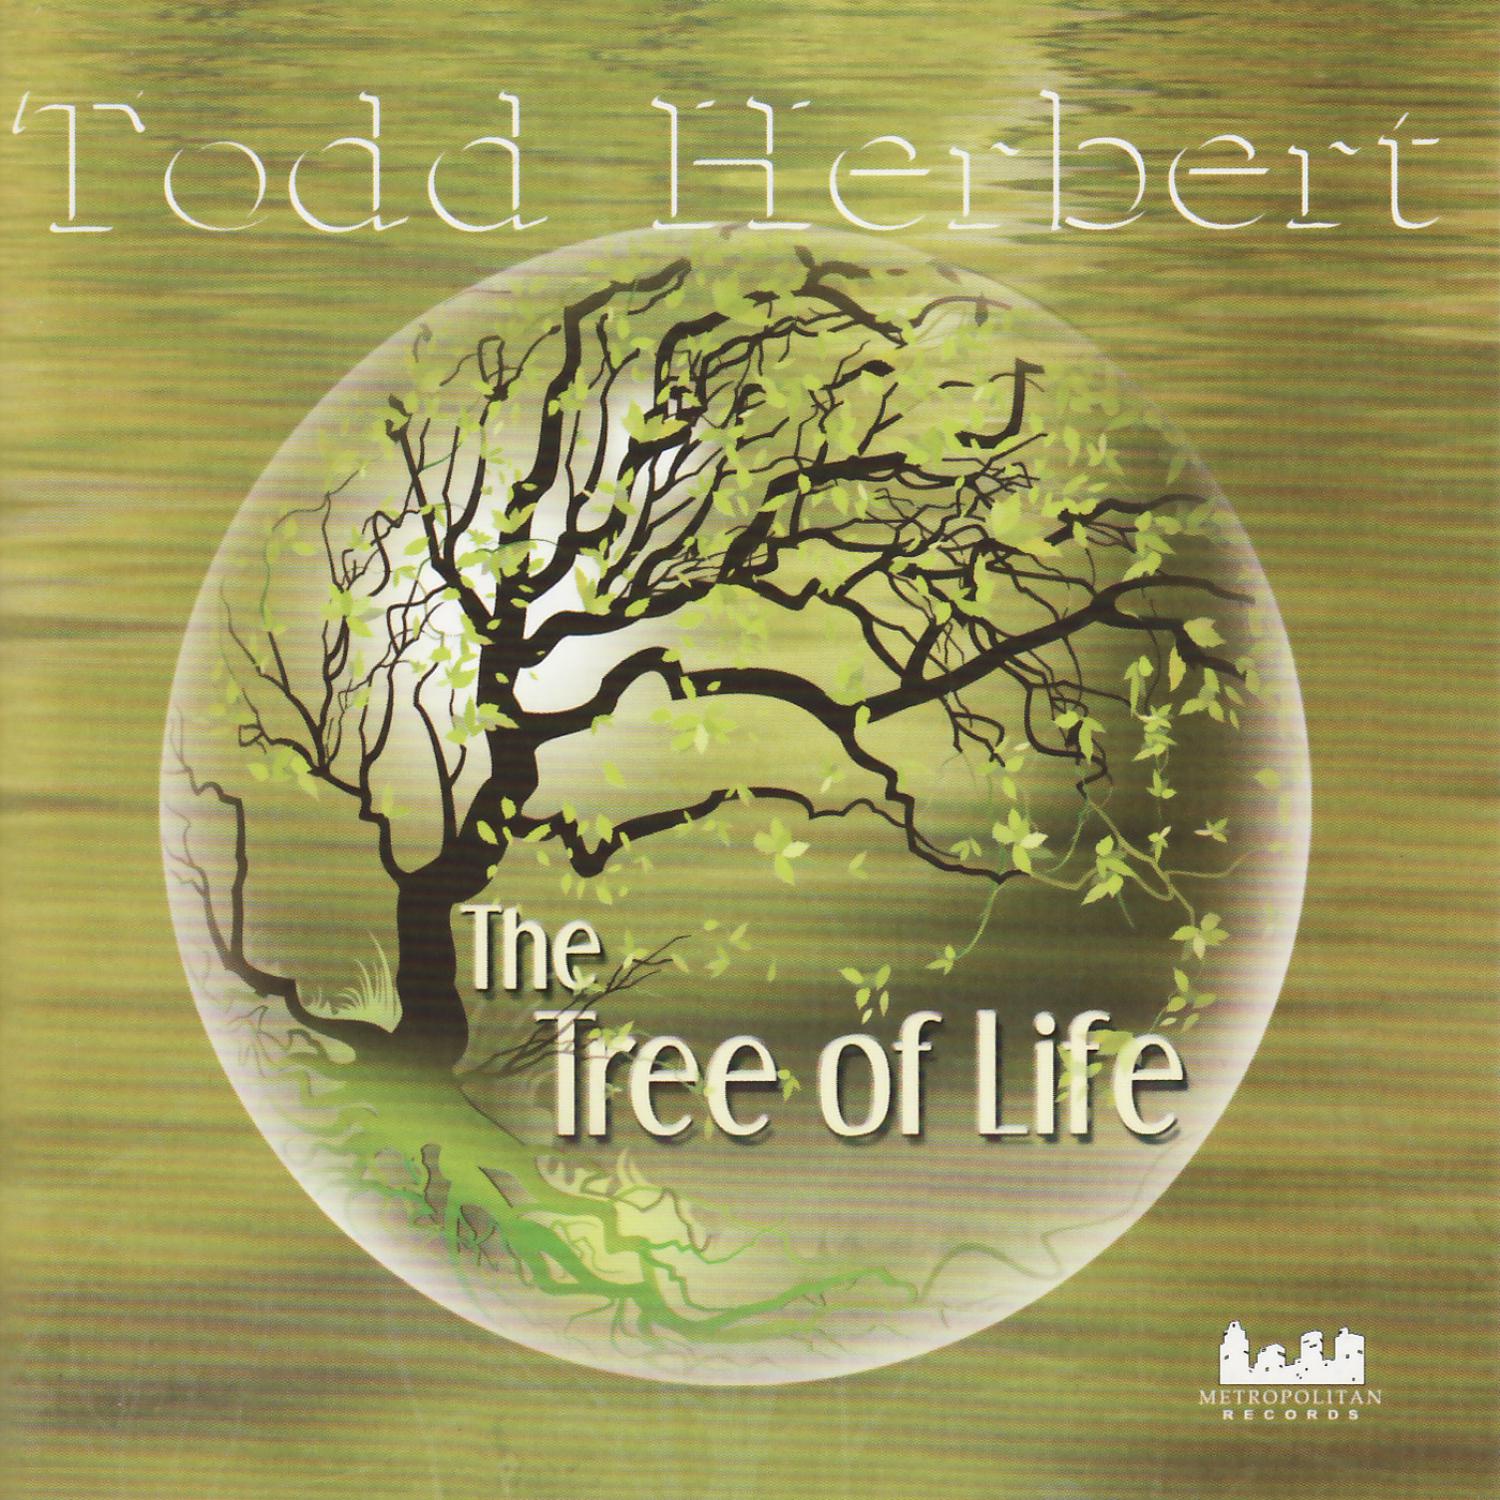 Todd Herbert - Look into the Abyss